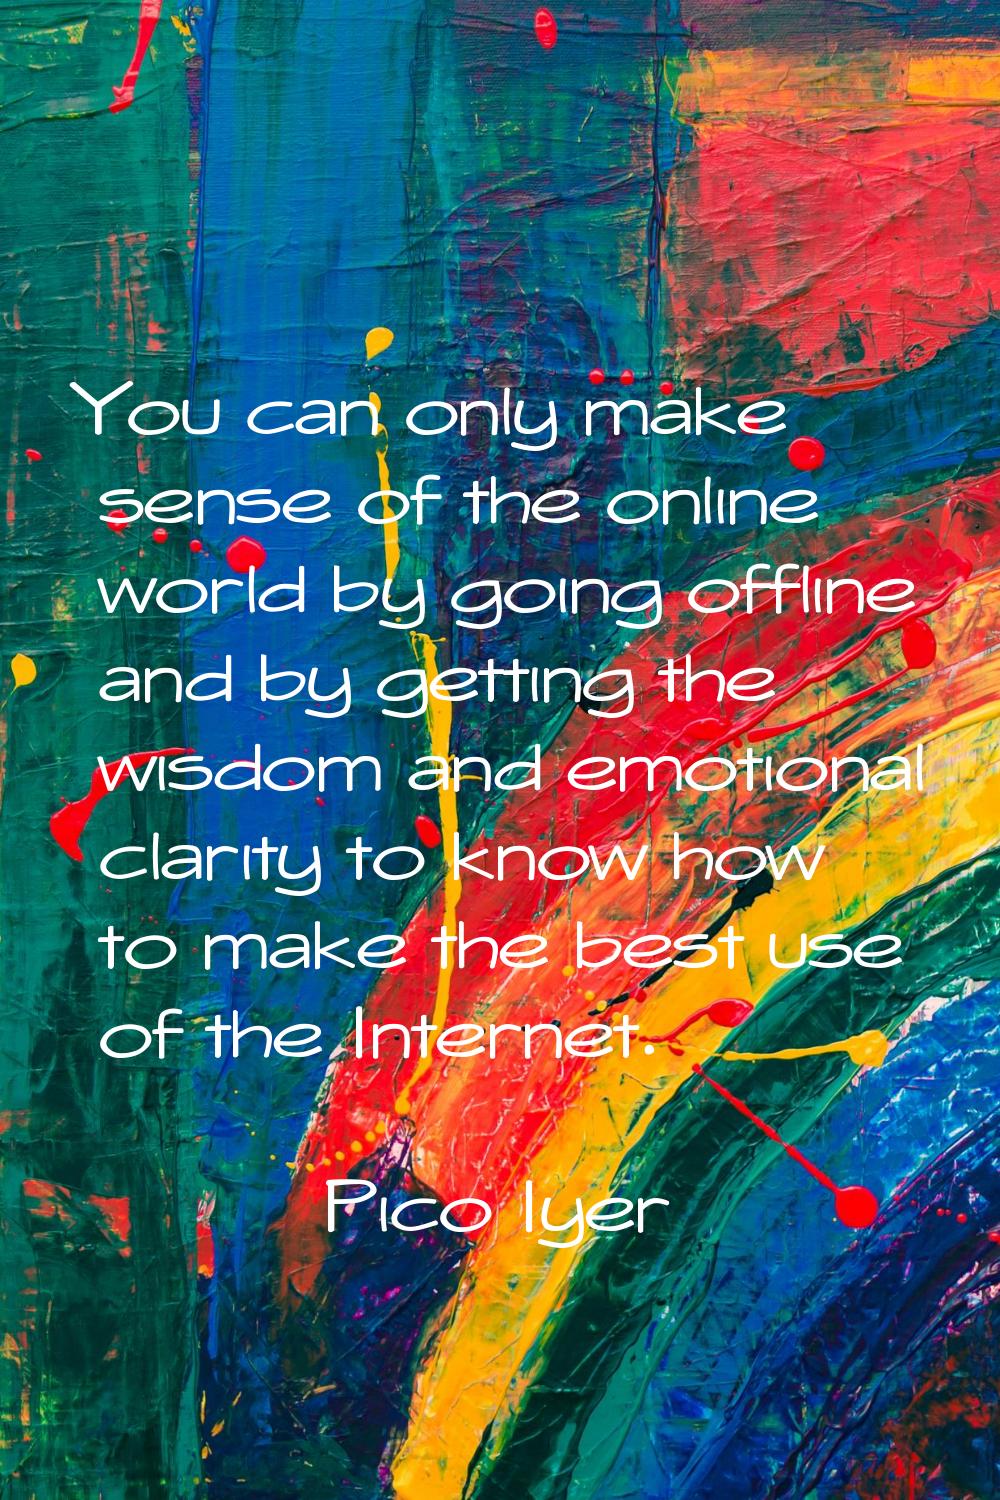 You can only make sense of the online world by going offline and by getting the wisdom and emotiona